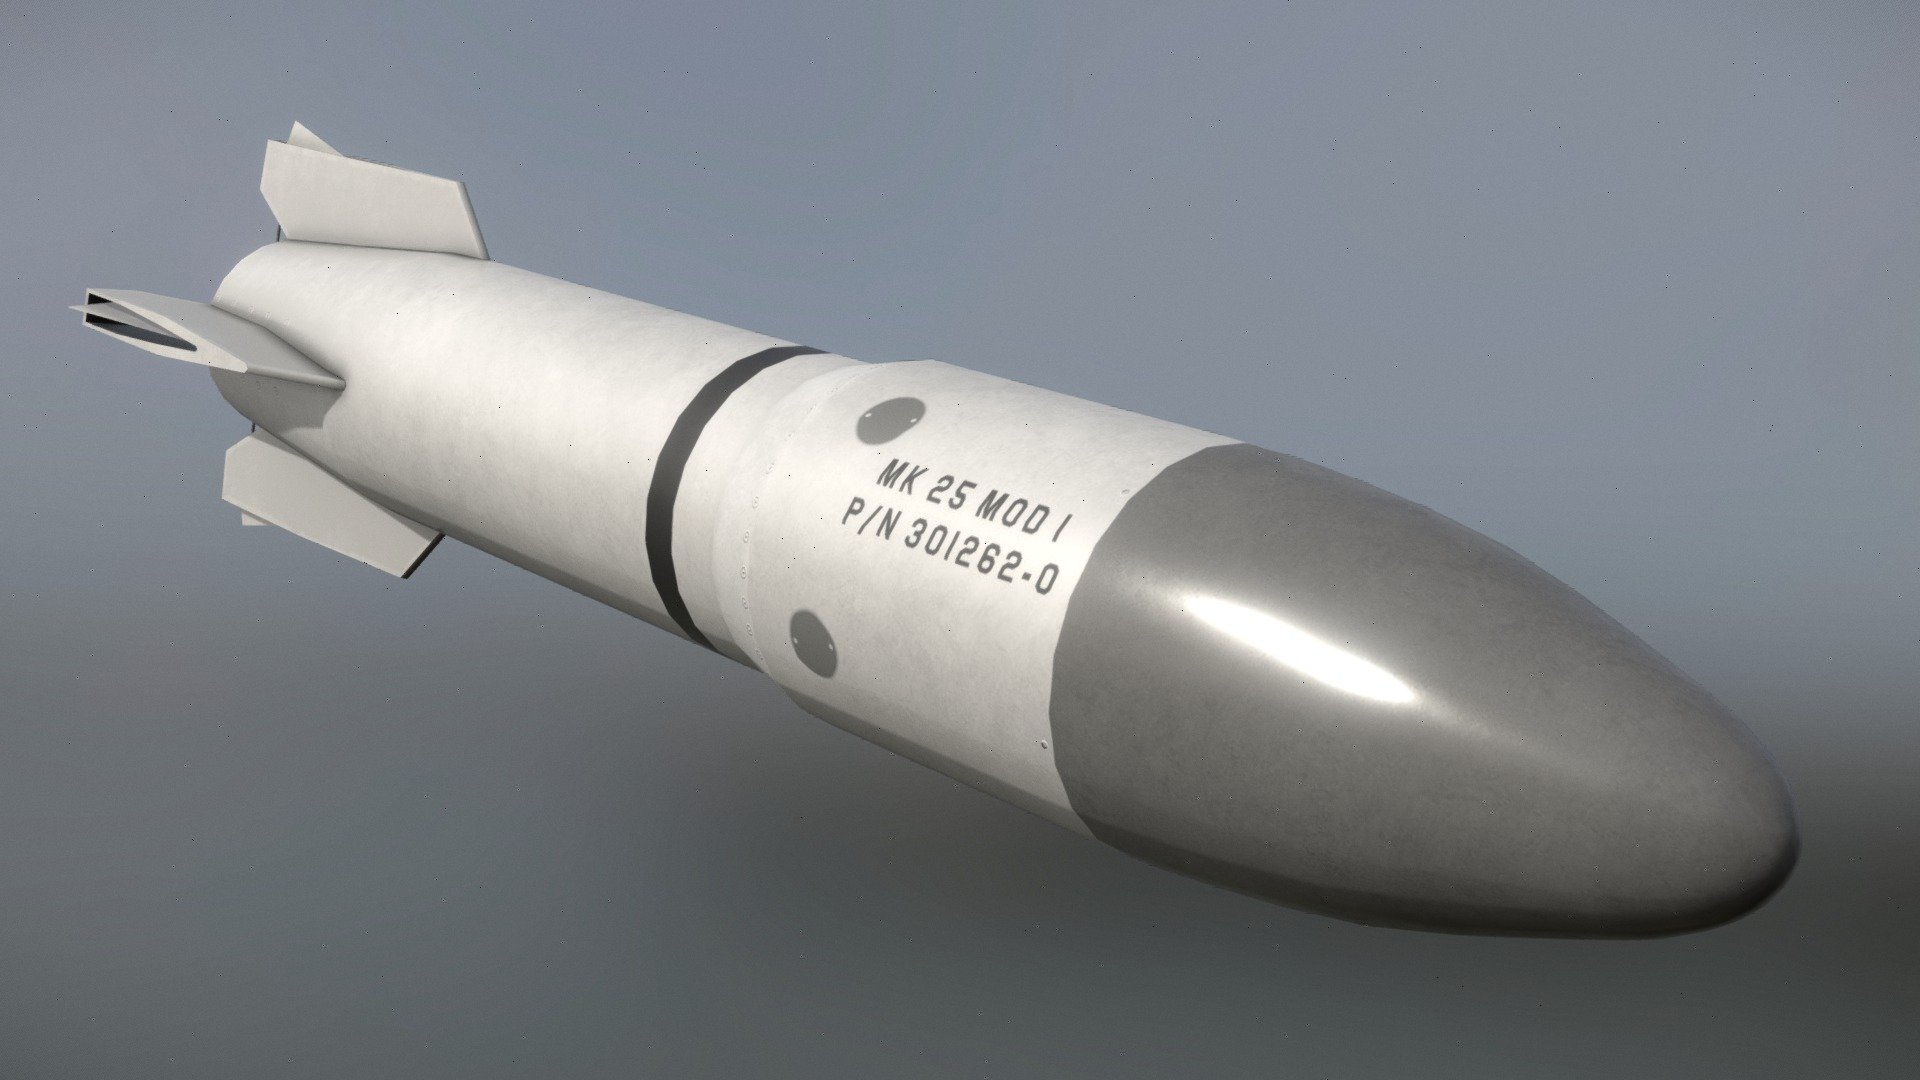 AIR-2 Genie, a unguided air-to-air nuclear rocket

2k textures, optimized for VR and low poly games - AIR-2 Genie - Buy Royalty Free 3D model by BorisBC 3d model